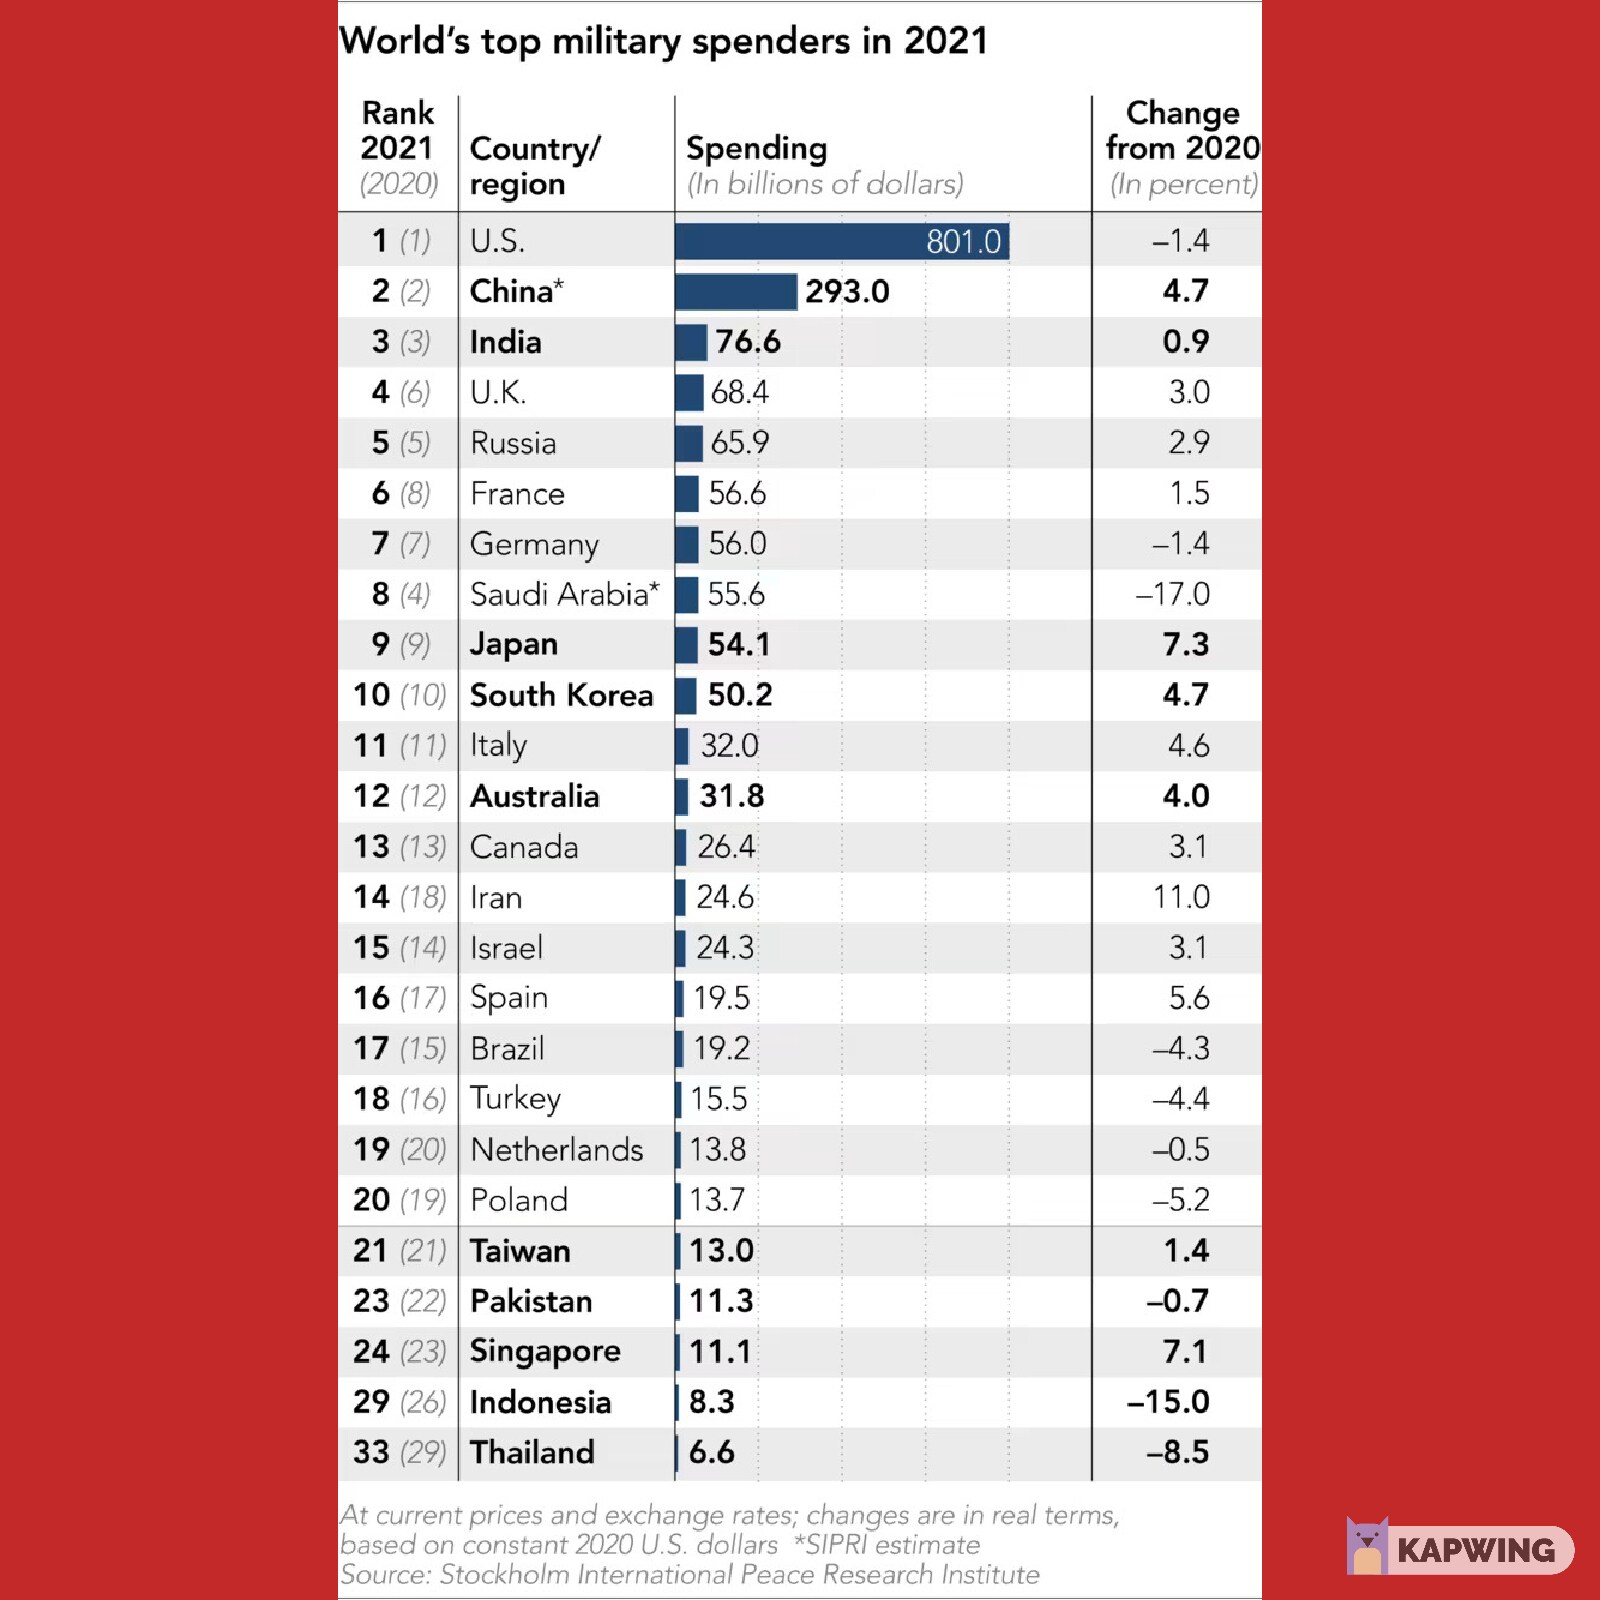 Table showing highest military spenders